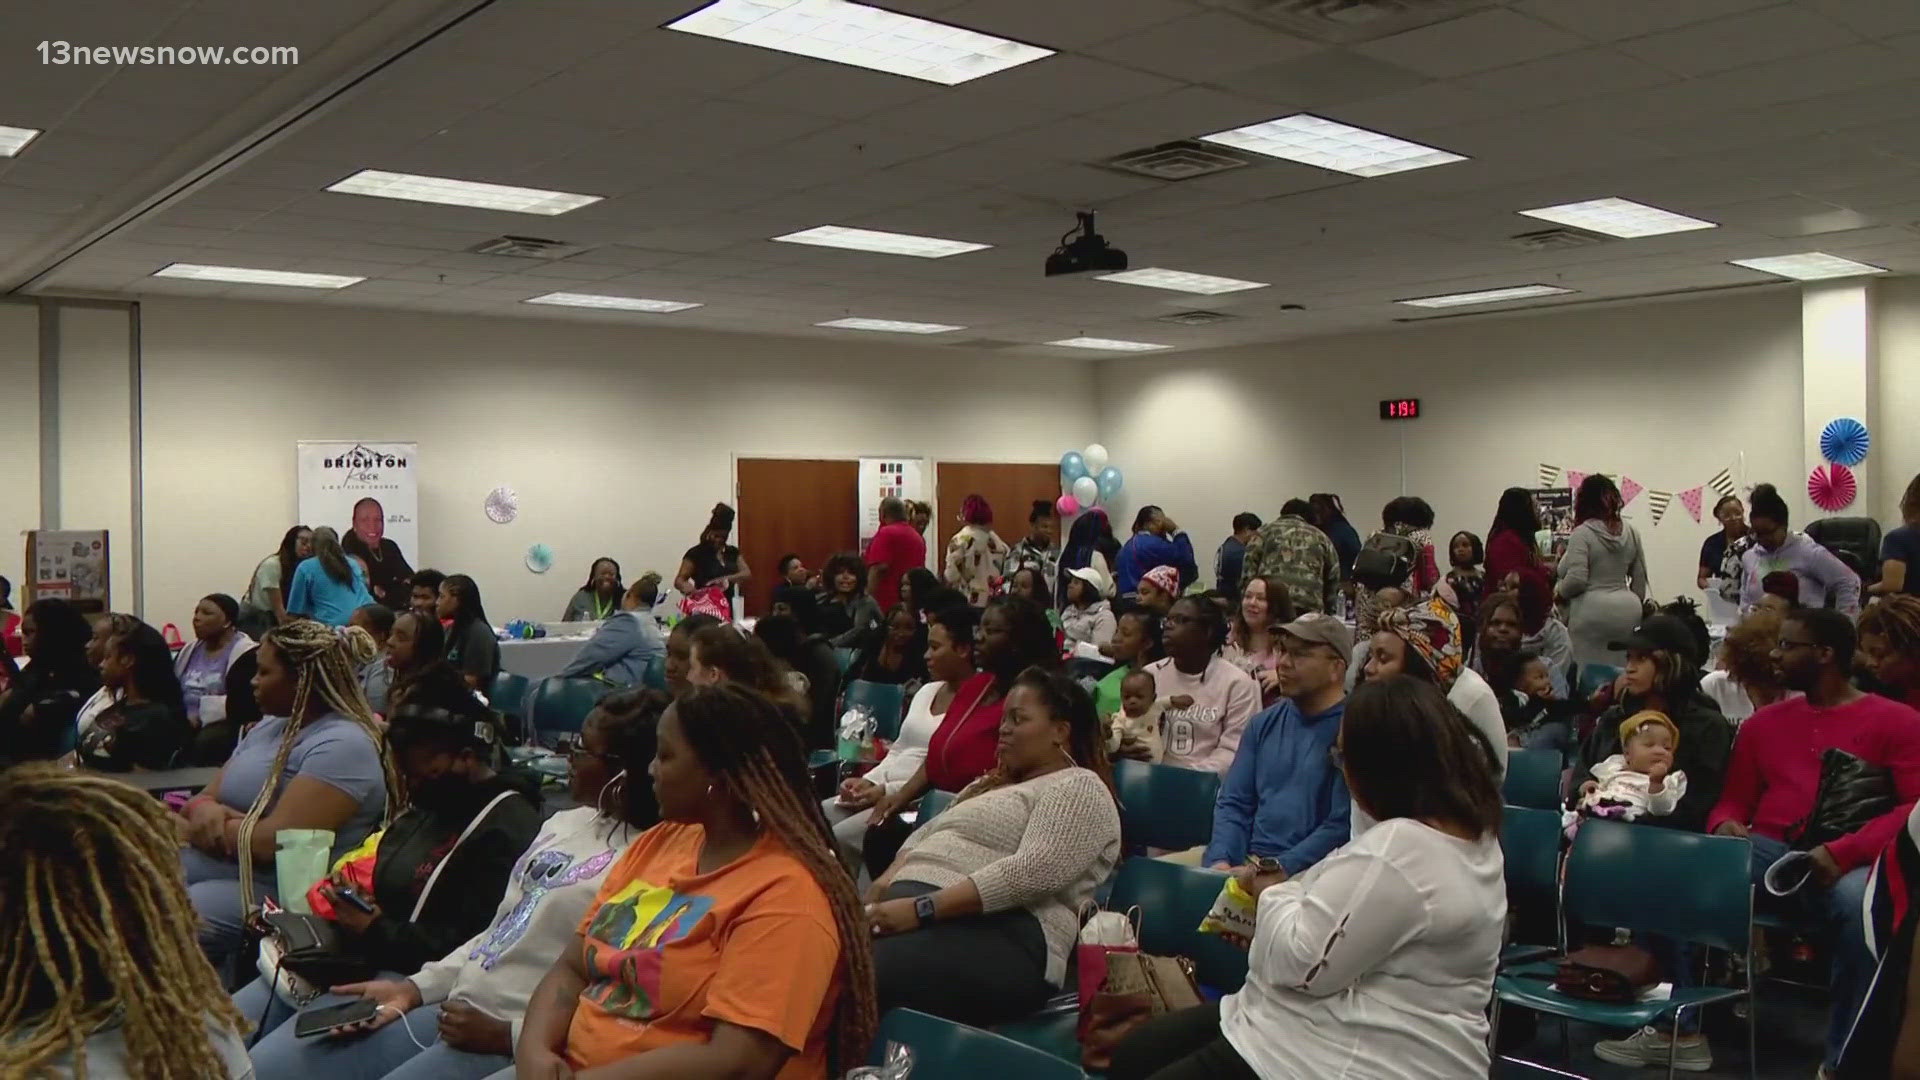 Expectant mothers and new parents were invited to a community baby shower.